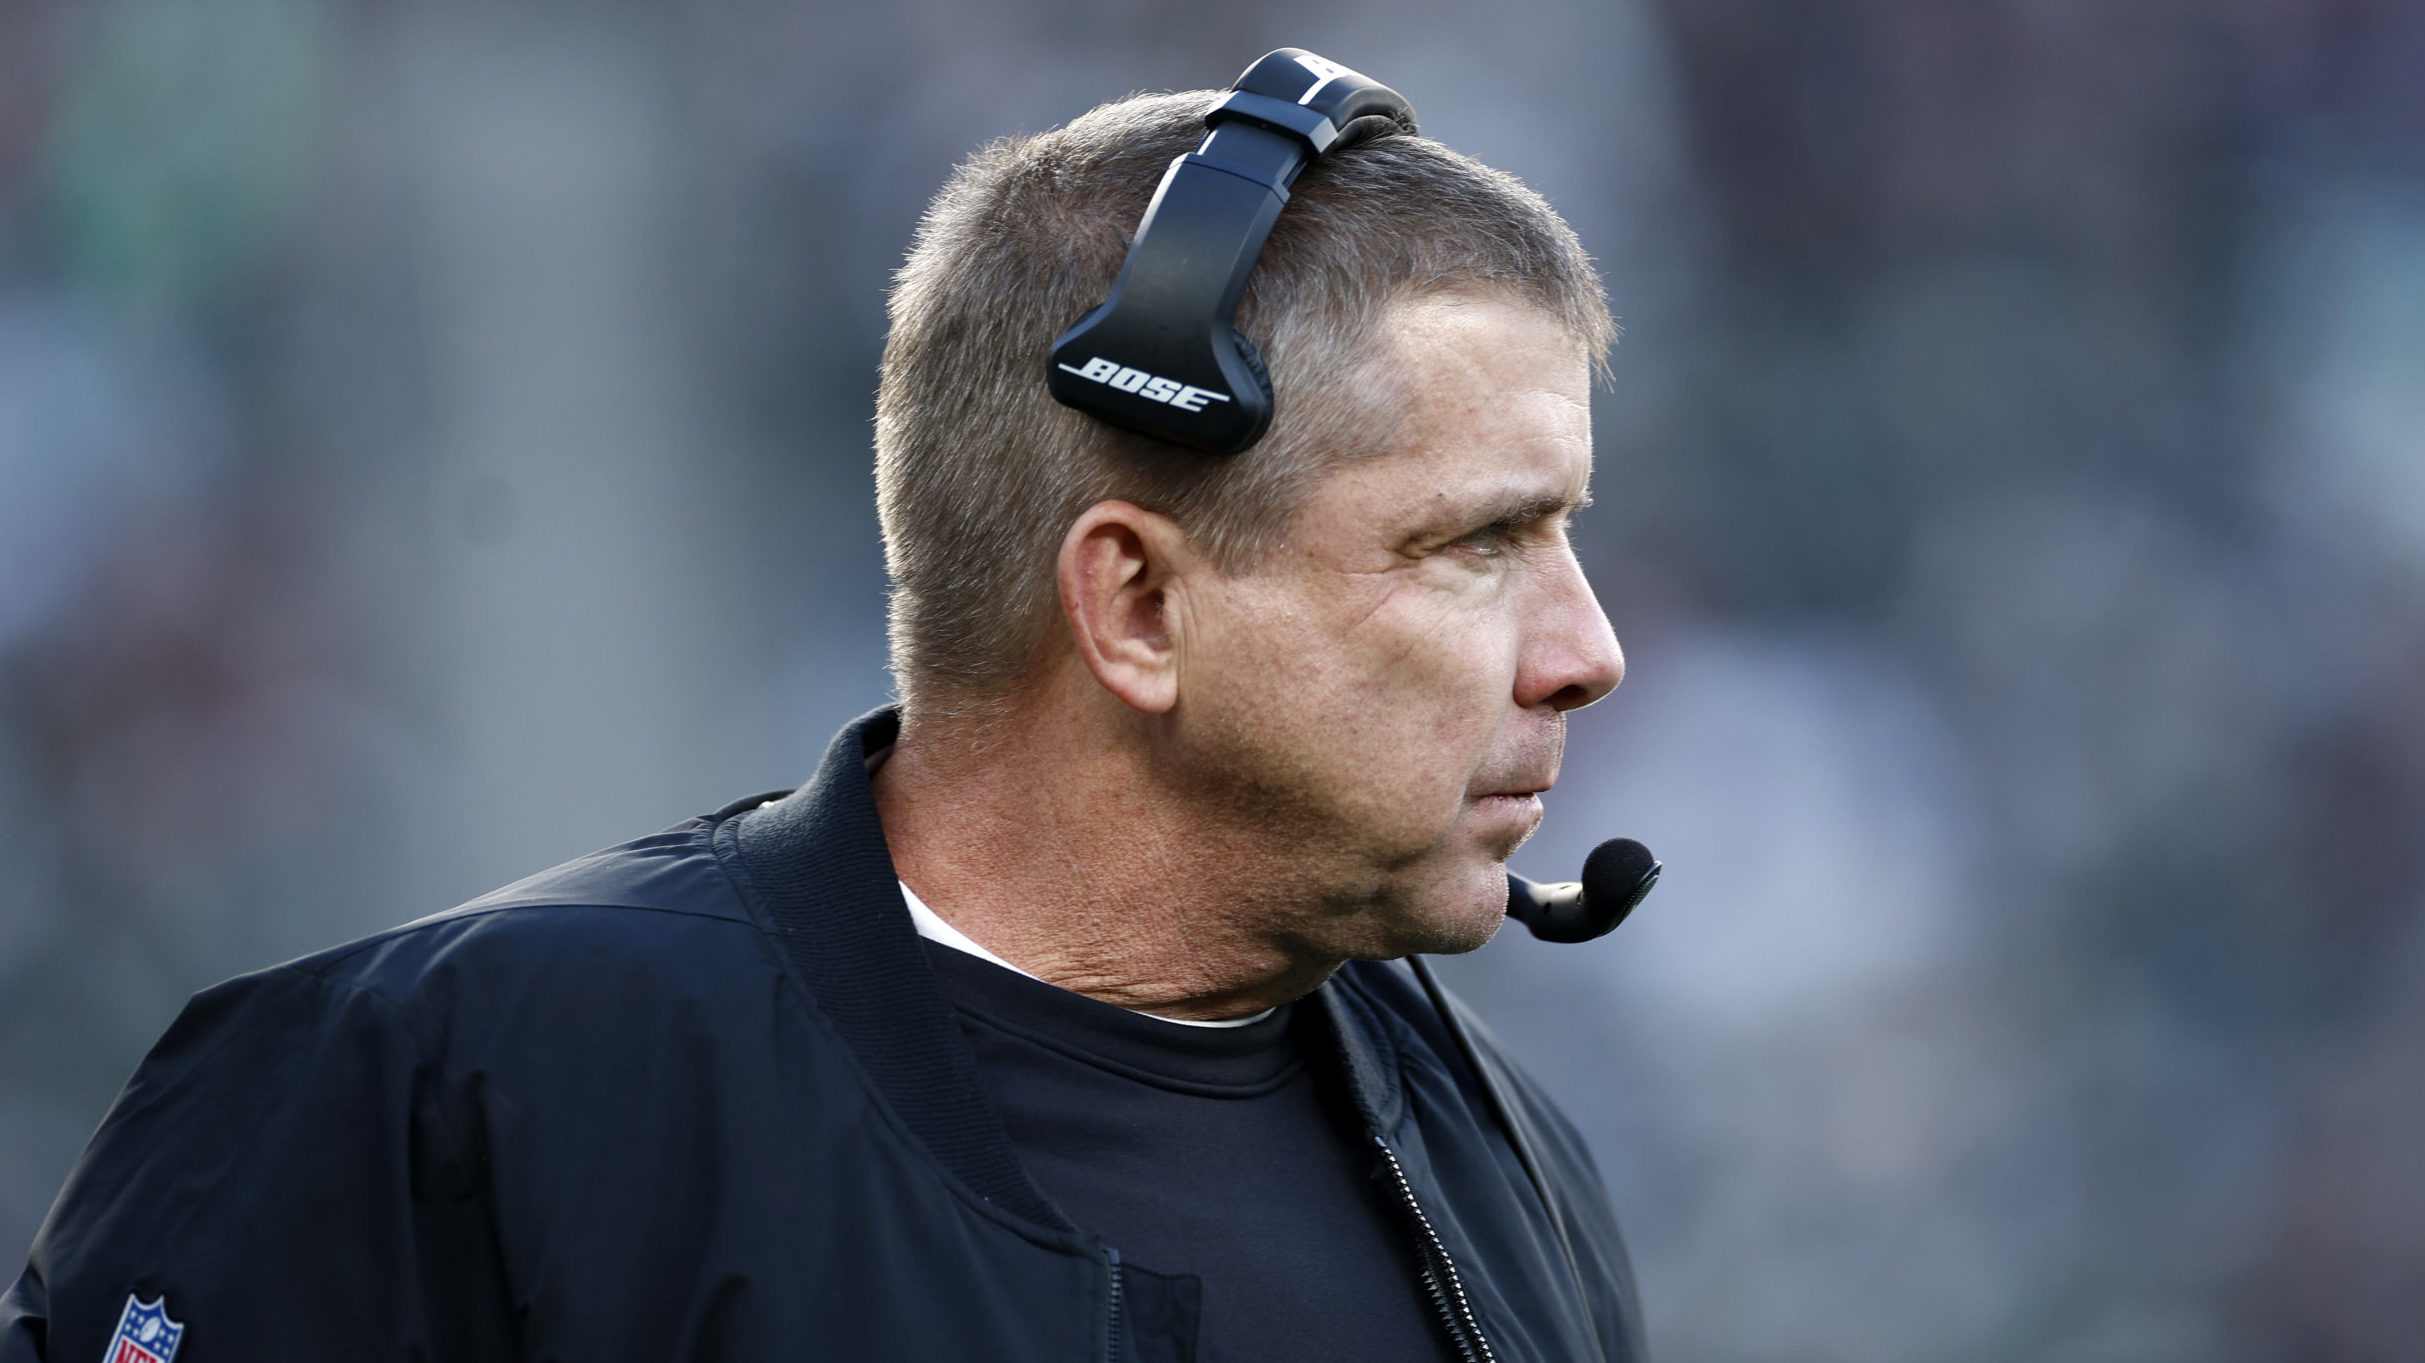 Sean Payton still in play for Arizona Cardinals after interview, per report